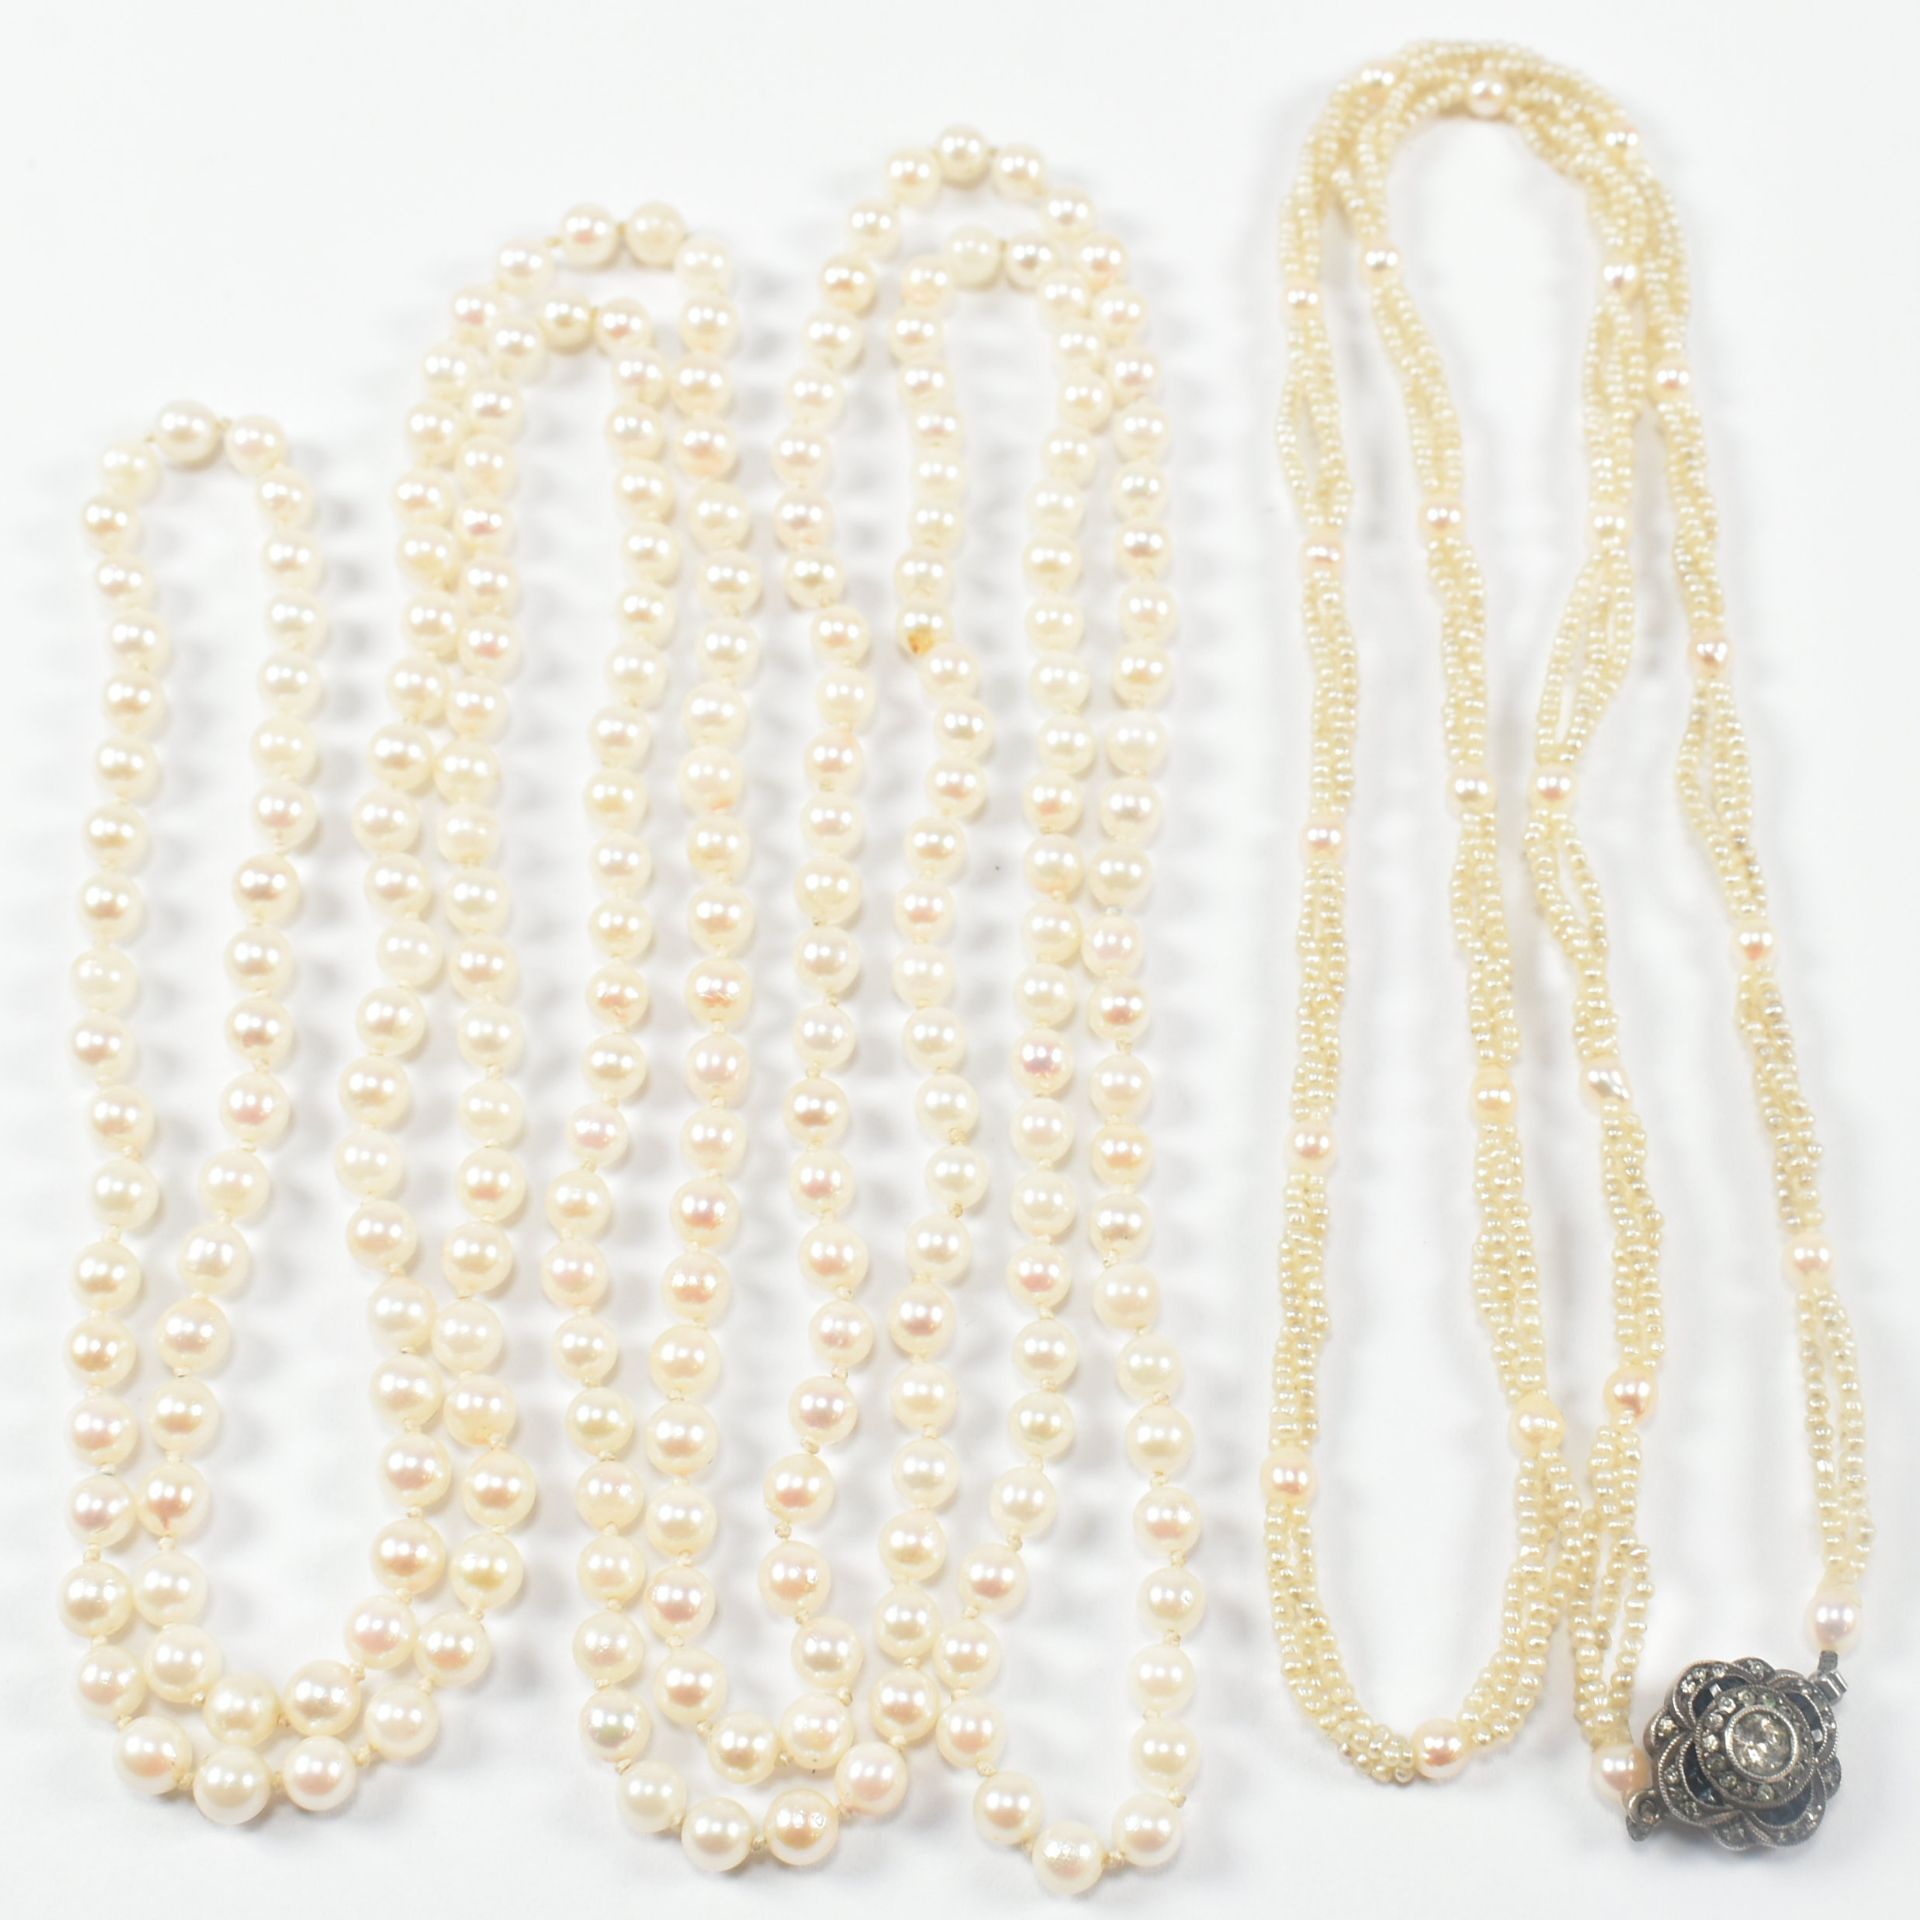 TWO PEARL NECKLACES - Image 6 of 6